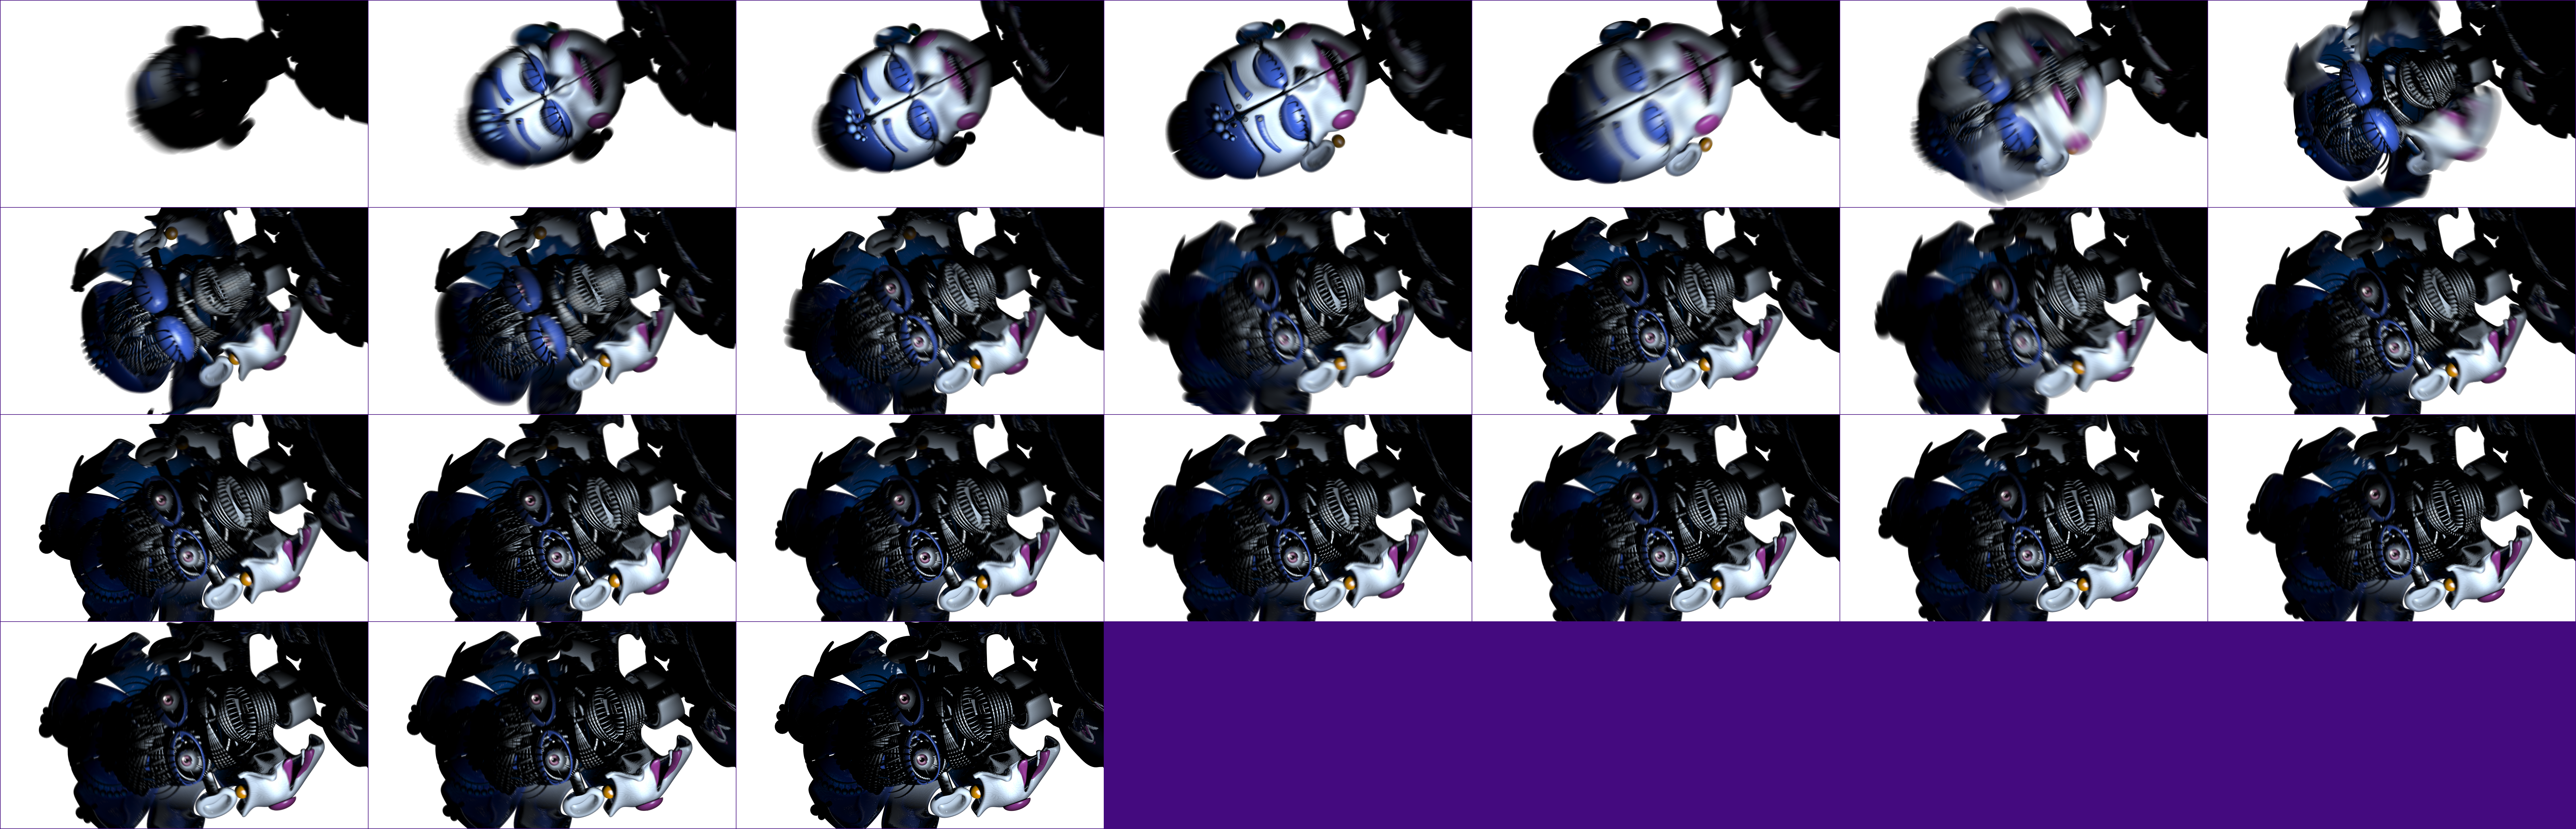 Pc Computer Five Nights At Freddy S Sister Location Ballora Ballora Gallery The Spriters Resource